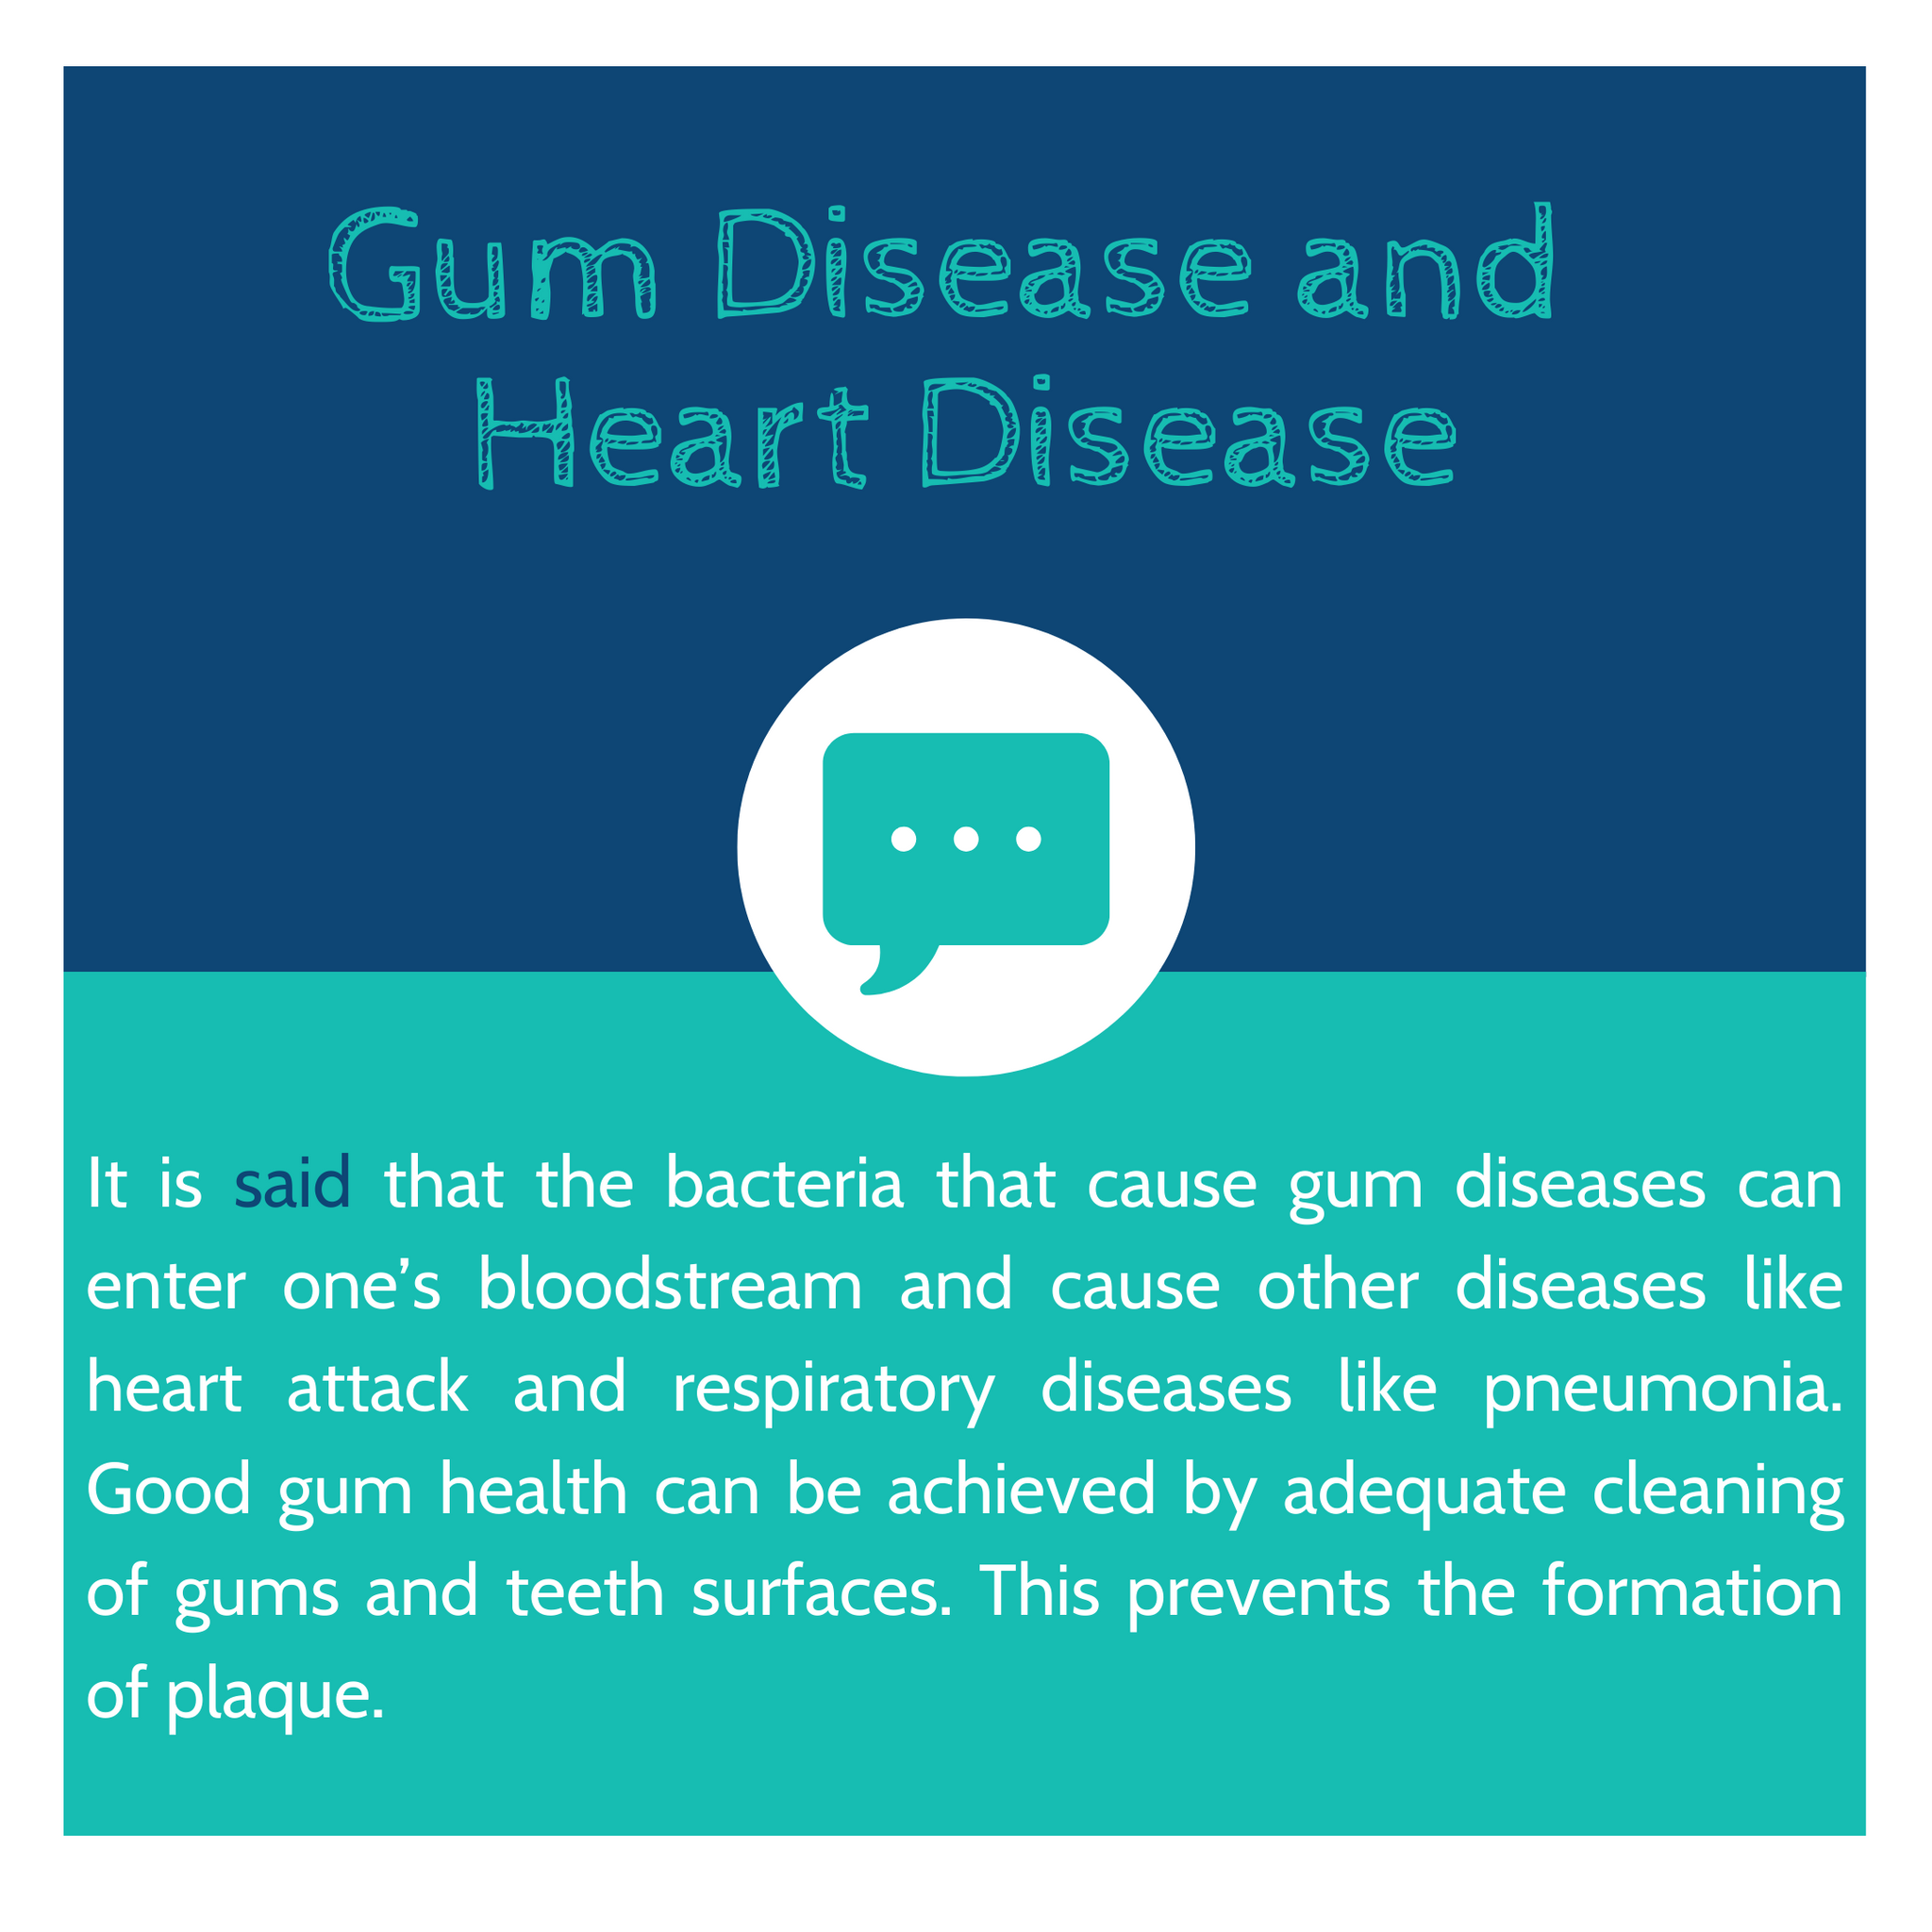 It is said that the bacteria that cause gum diseases can enter one’s bloodstream and cause other diseases like heart attack and respiratory diseases like pneumonia. Good gum health can be achieved by adequate cleaning of gums and teeth surfaces. This prevents the formation of plaque.